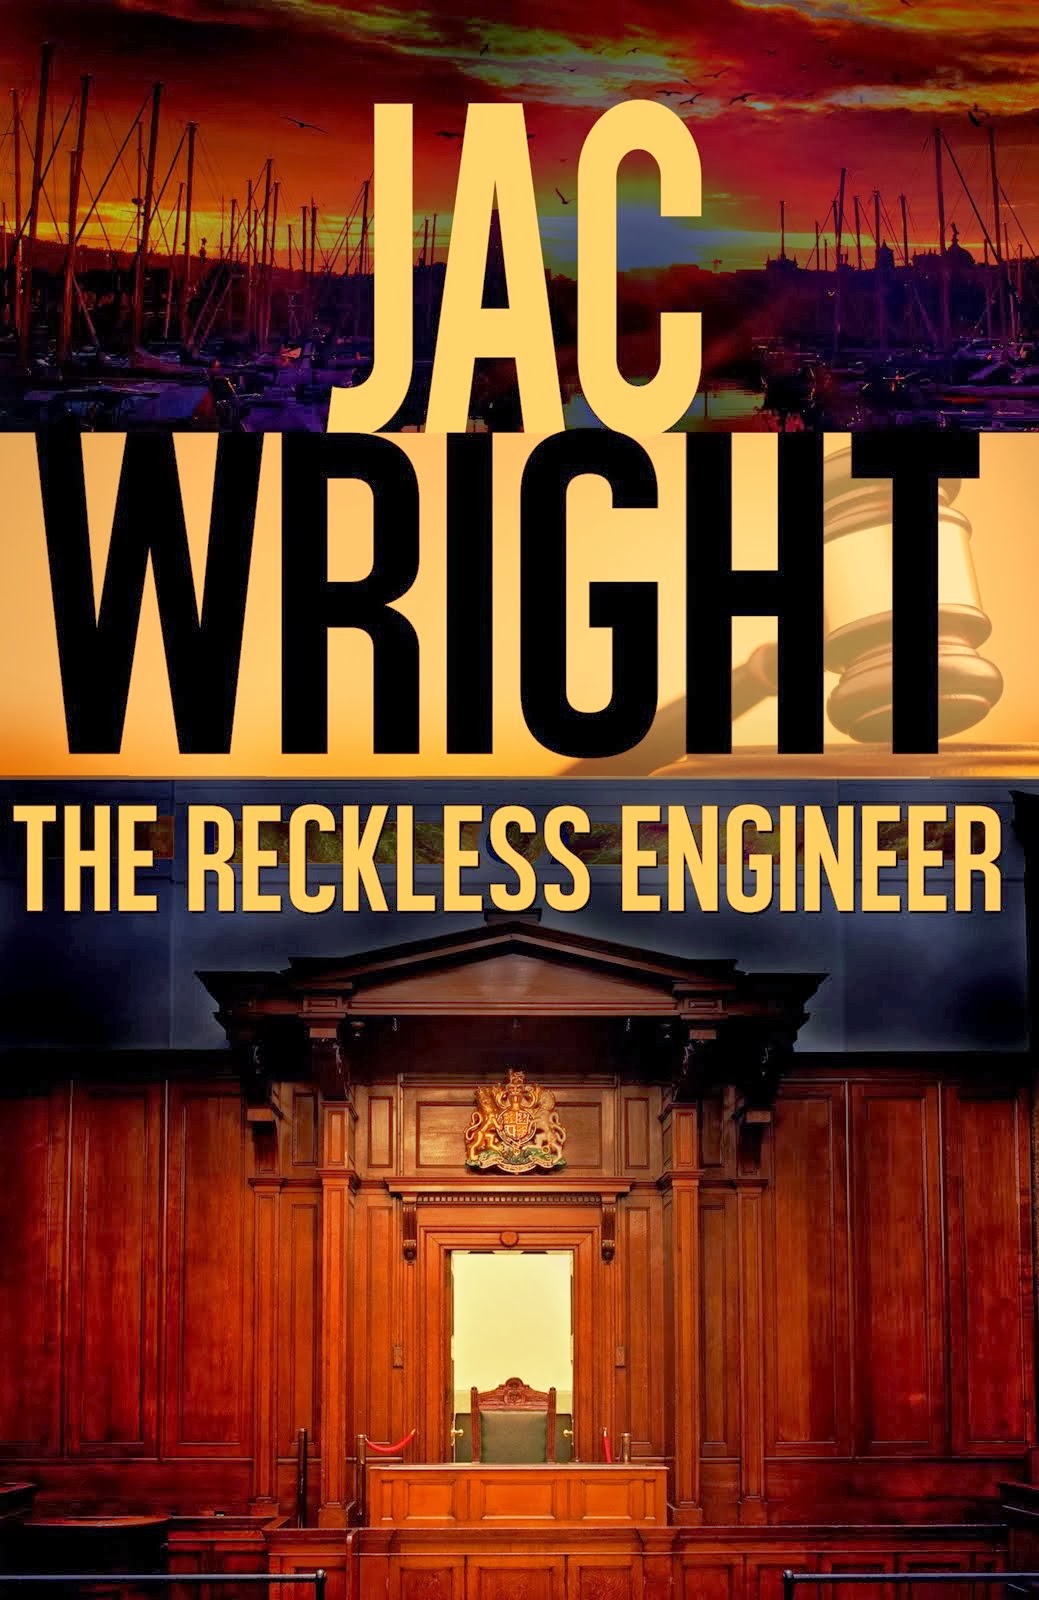 THE RECKLESS ENGINEER